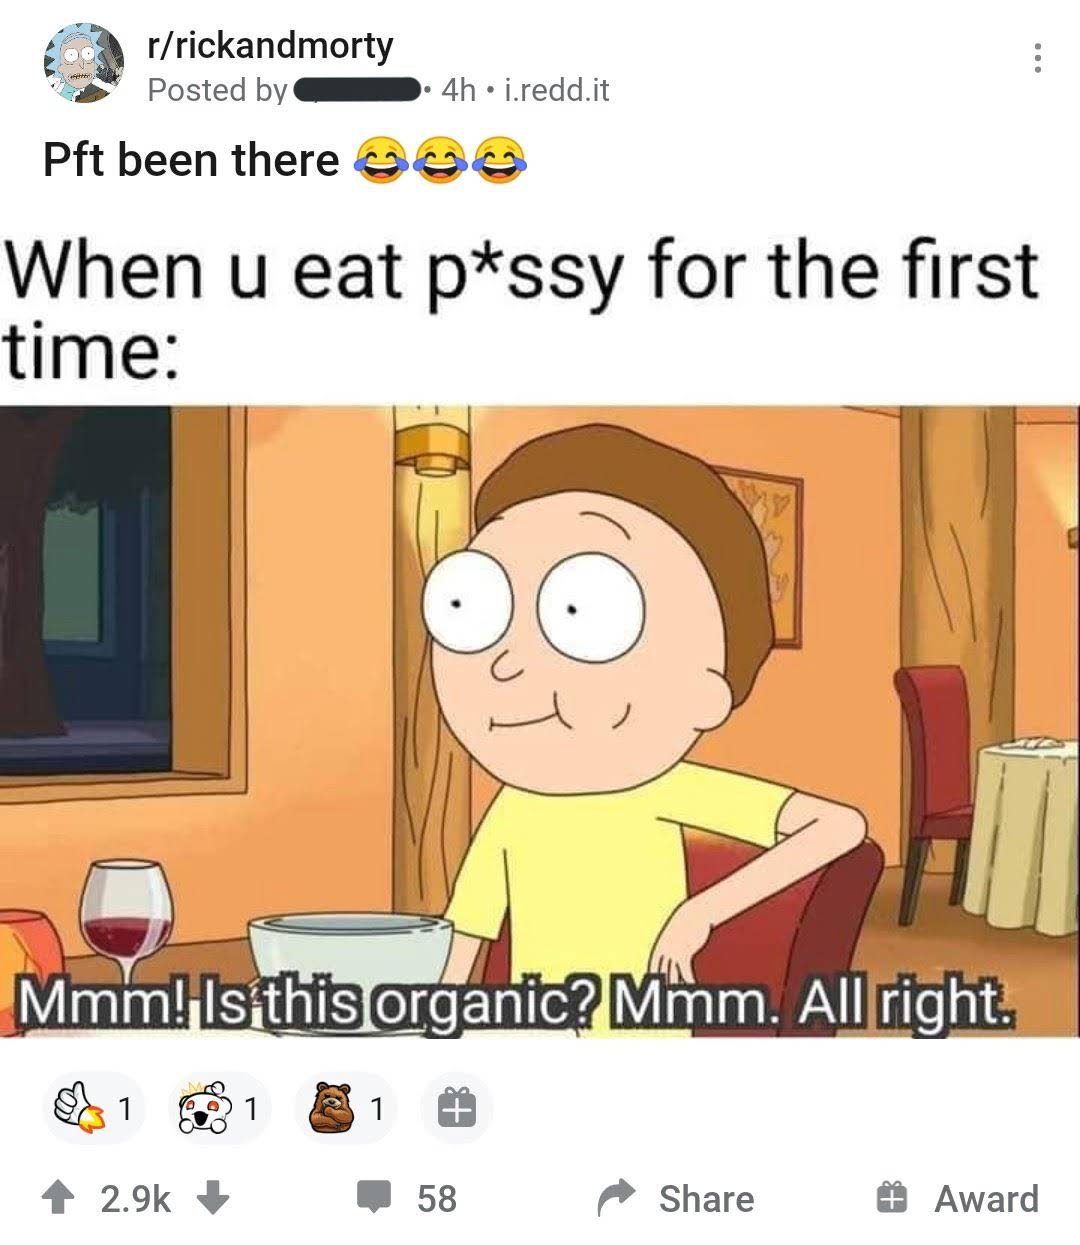 bad reddit posts- cartoon - rrickandmorty Posted by 4h.i.redd.it Pft been there When u eat pssy for the first time Mmm! Is this organic? Mmm. All right. 1 1 1 58 # Award